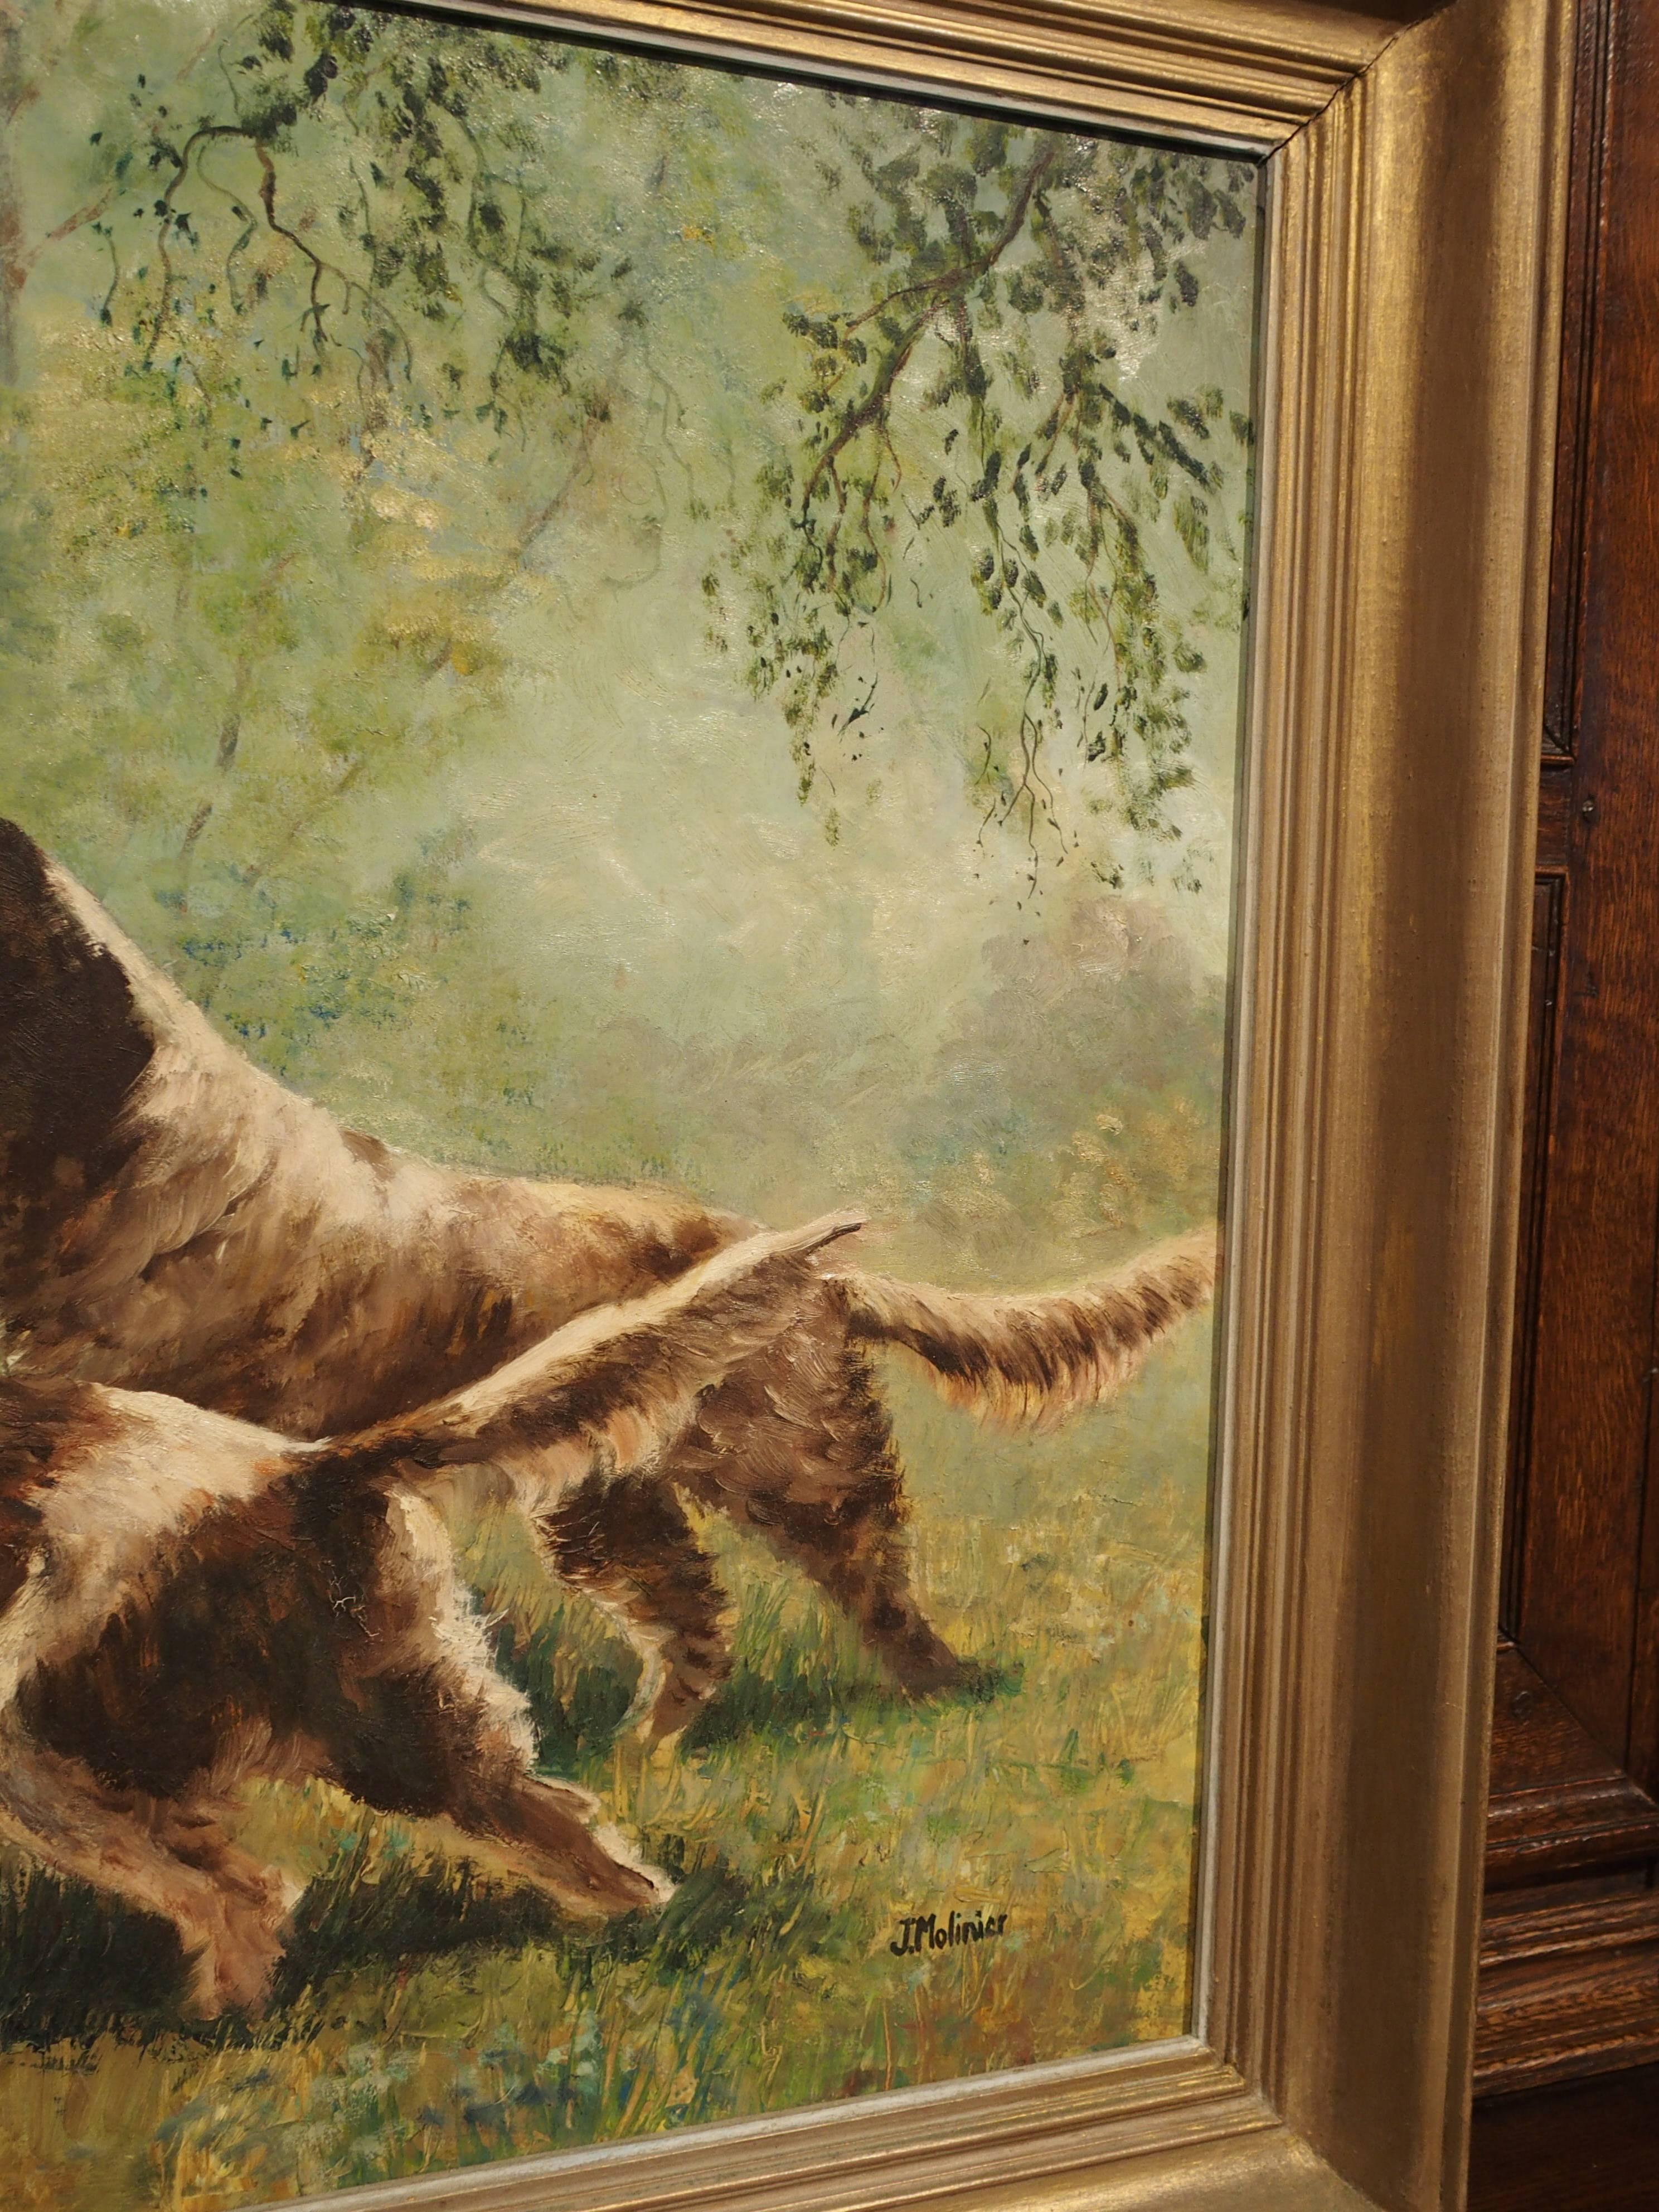 This framed oil painting on board depicts two hunting dogs in pursuit of their prey in a forested area. It was painted by the French artist, Jean Molinier, sometime during the 1900s. The artist has portrayed an intensity in the hunting dogs’ faces